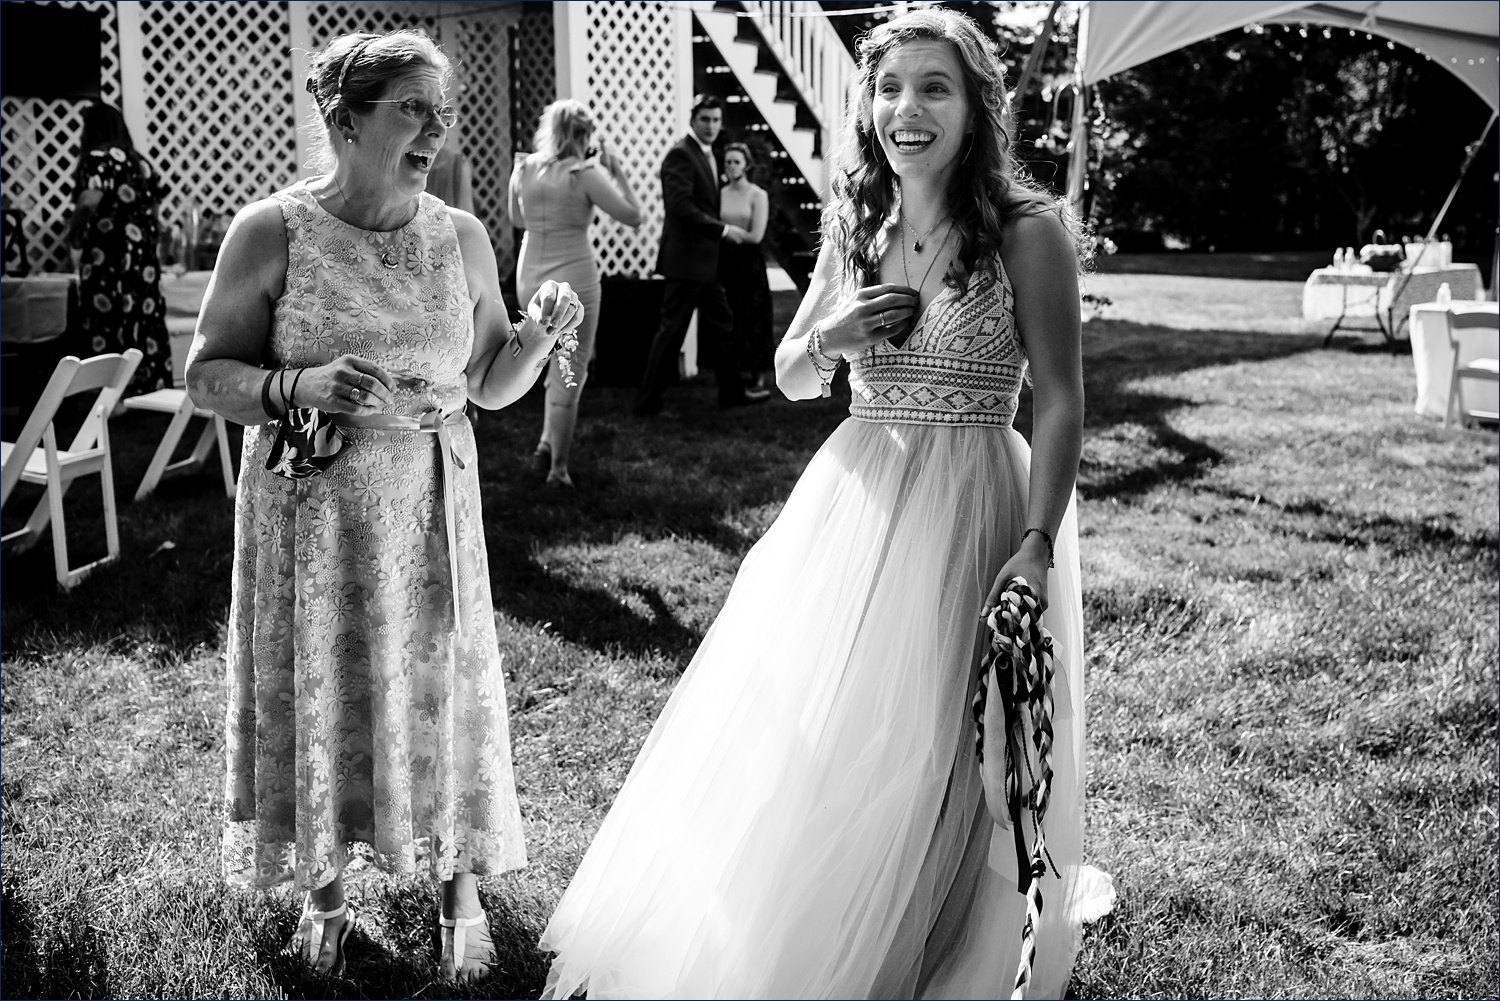 The bride and her mom celebrate the backyard wedding ceremony being complete